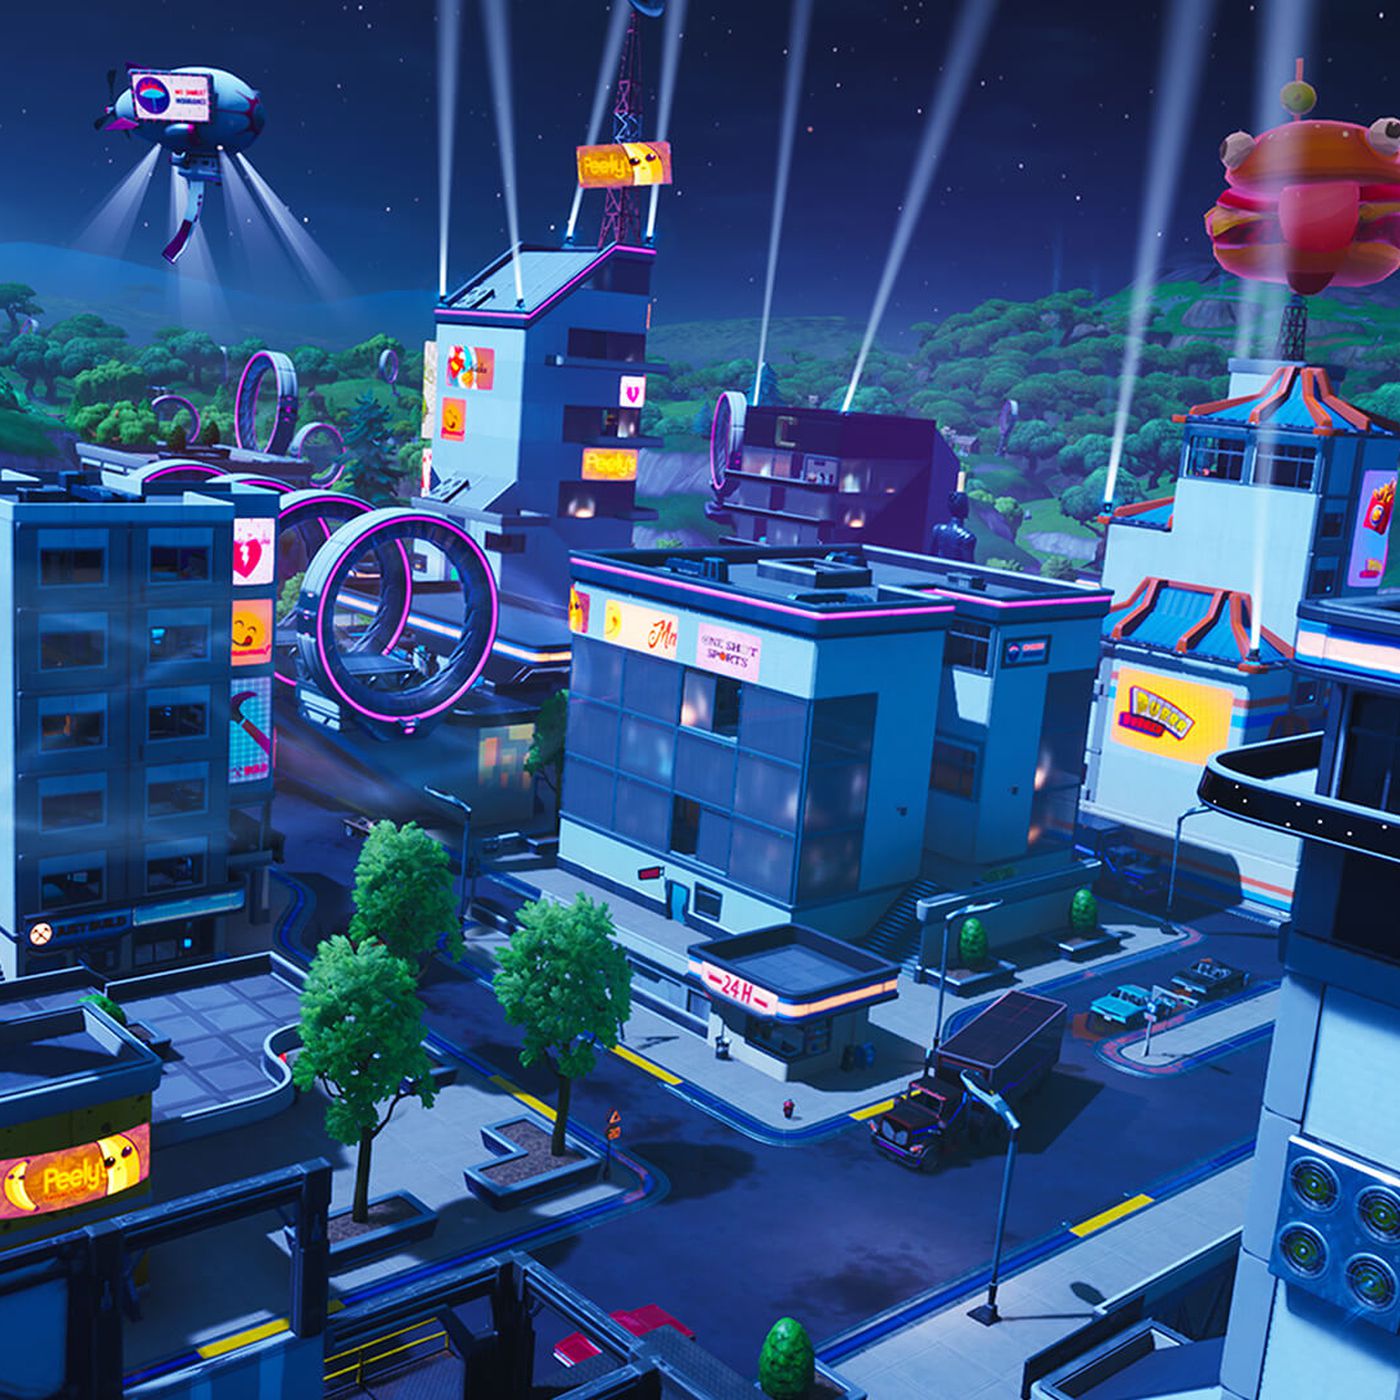 Fortnite Season Adds Wind Tunnels And A Rebuilt Tilted Towers